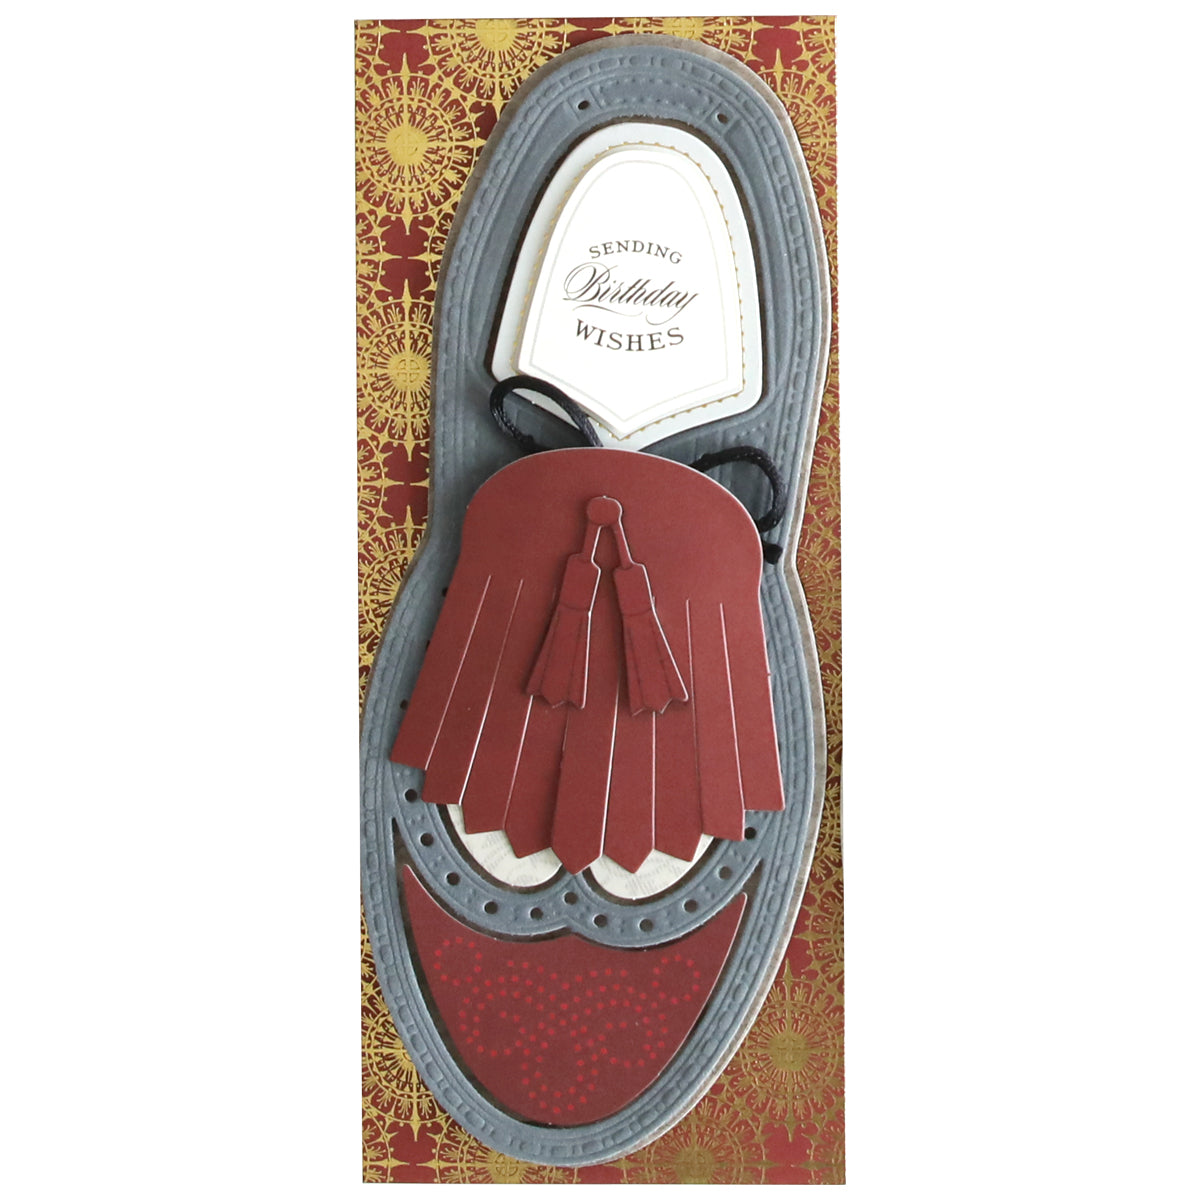 This Paper Wingtips Refill Kit, made from premium cardstock, features a decorative shoe design with a tassel on the front and 3D embellishments. Inside, it warmly conveys "Sending Birthday Wishes." Perfect to include in a personalized Craft Box for that special someone.